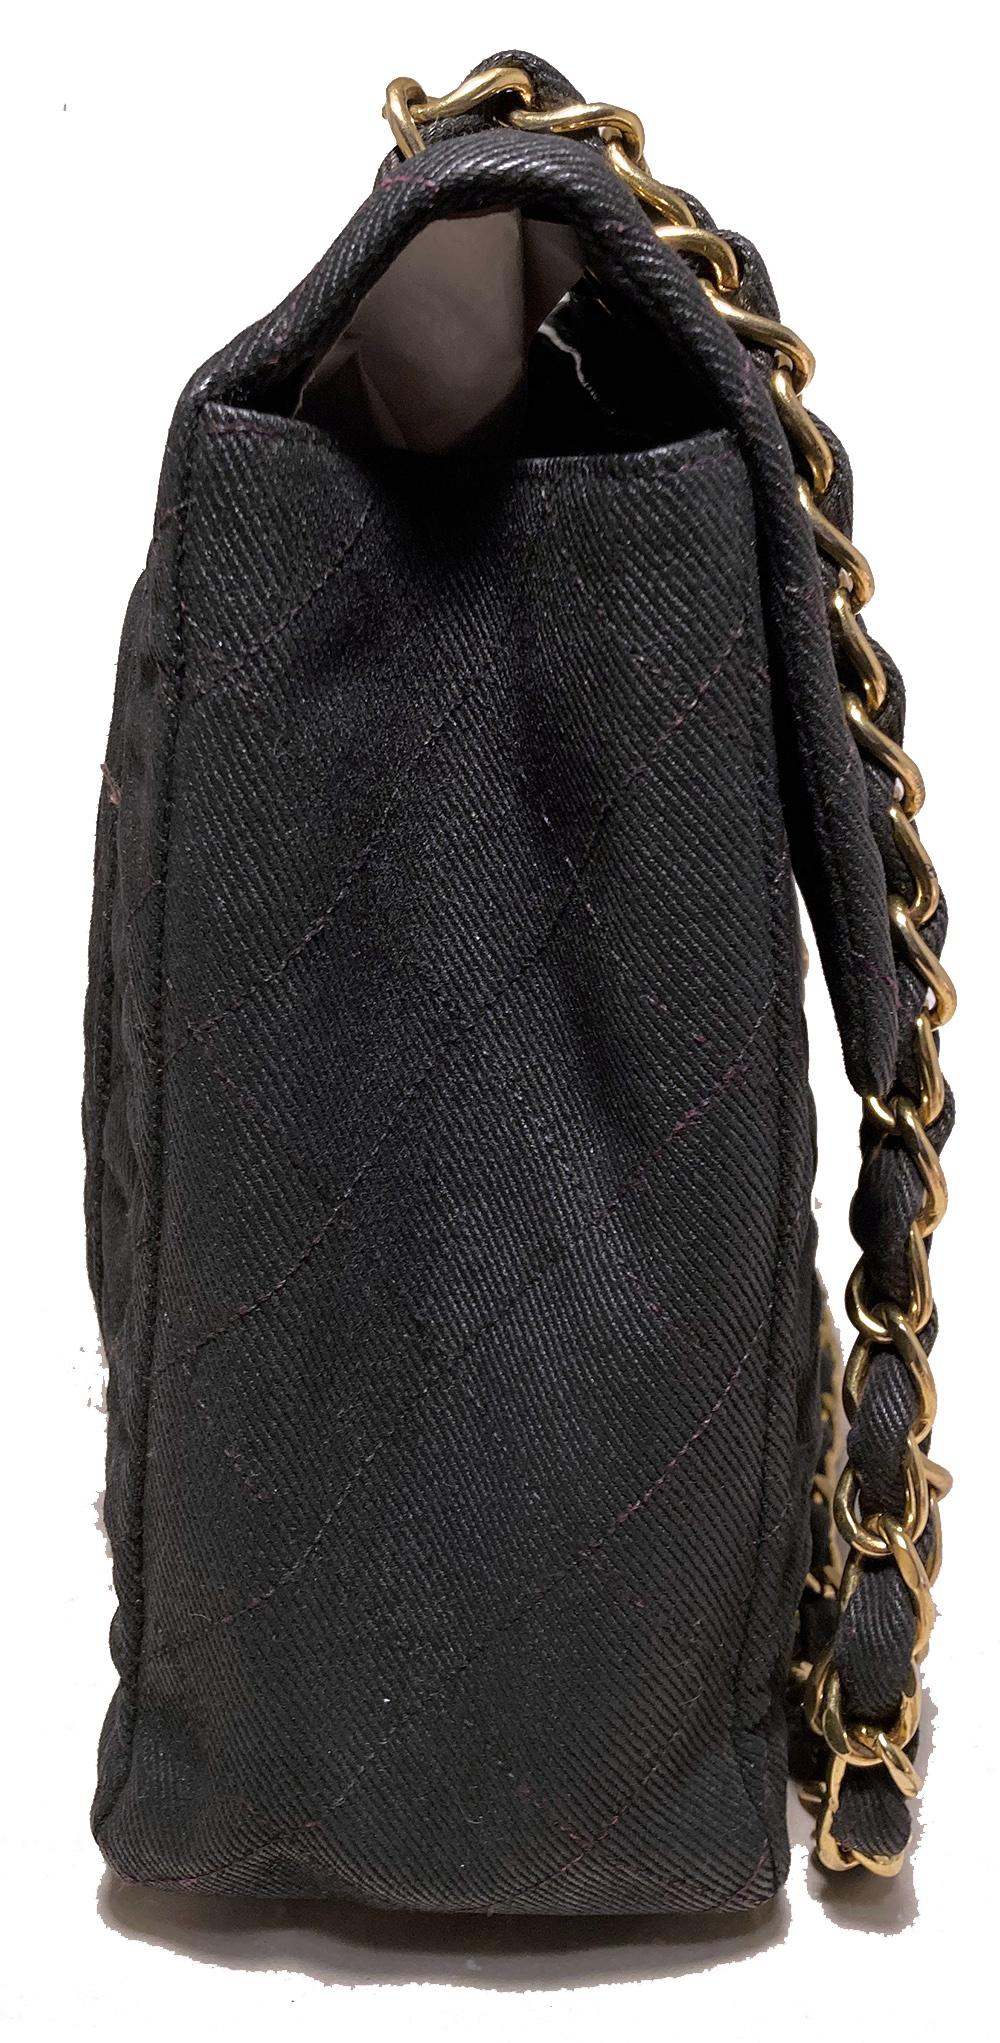 Chanel Black Denim Maxi Classic Flap Shoulder Bag in very good condition. Quilted black denim exterior trimmed with gold hardware. Front CC logo twist closure opens via single flap to a black leather interior with one slit and one zipped side